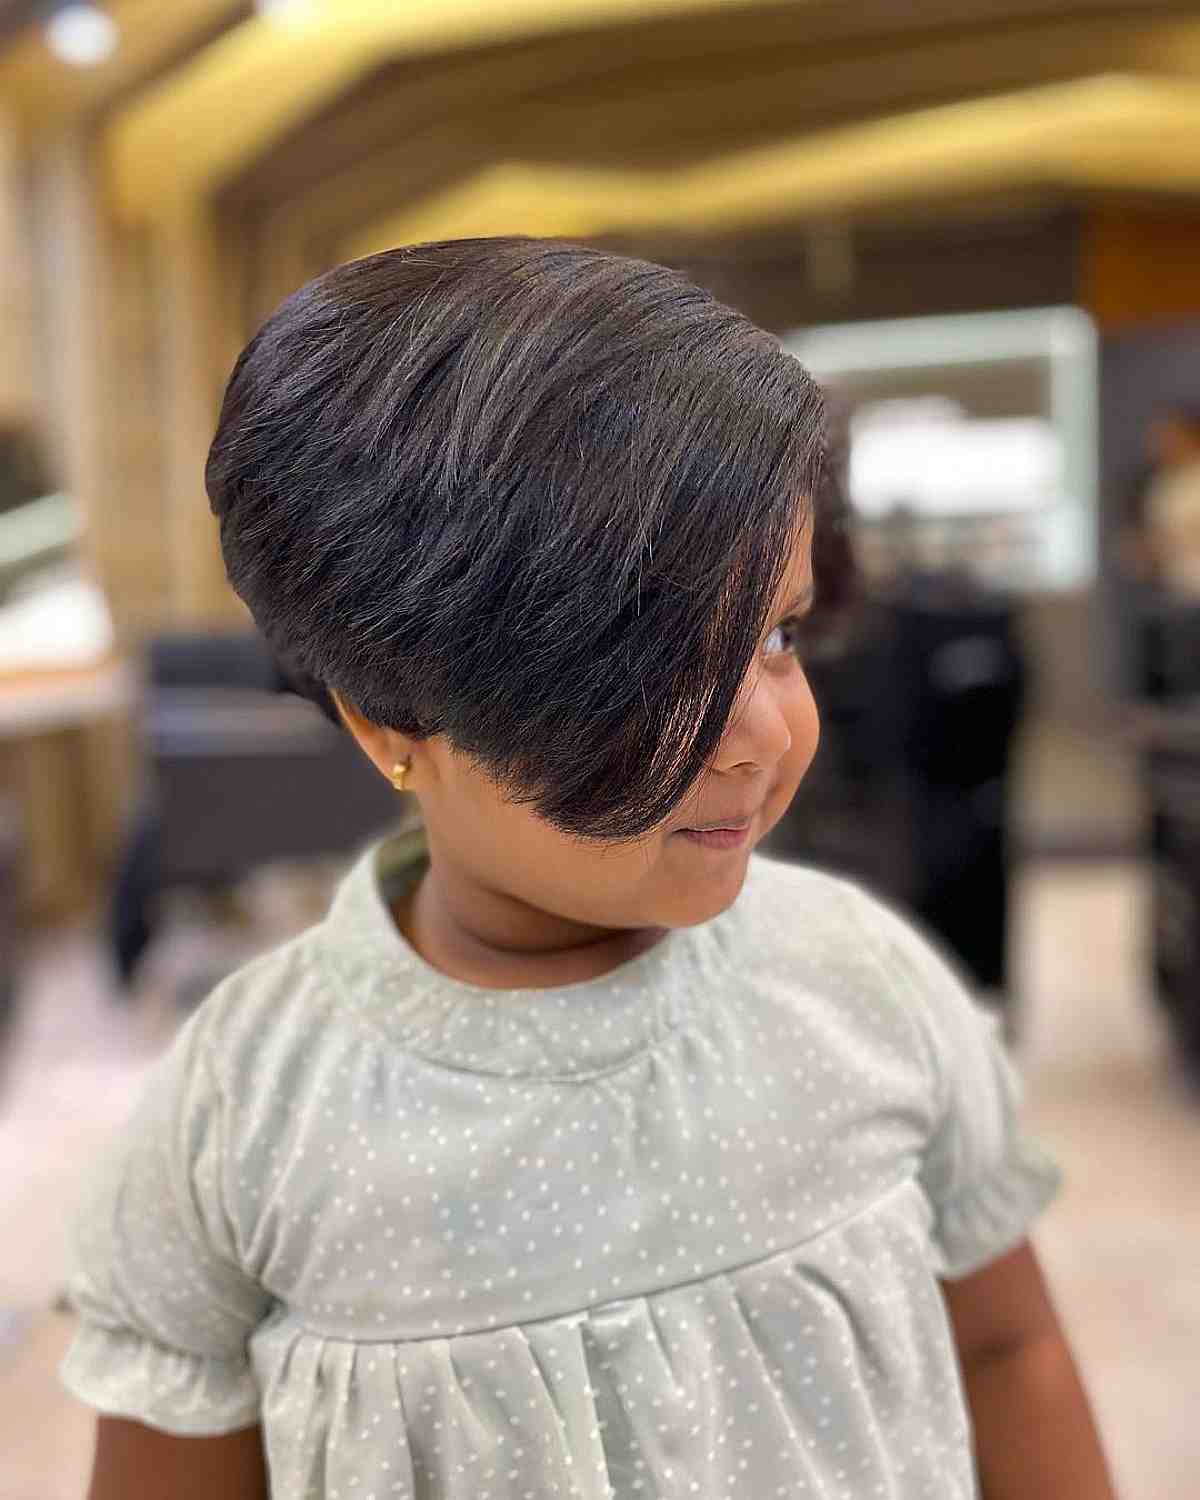 Descubra 100 image girl baby haircut images 